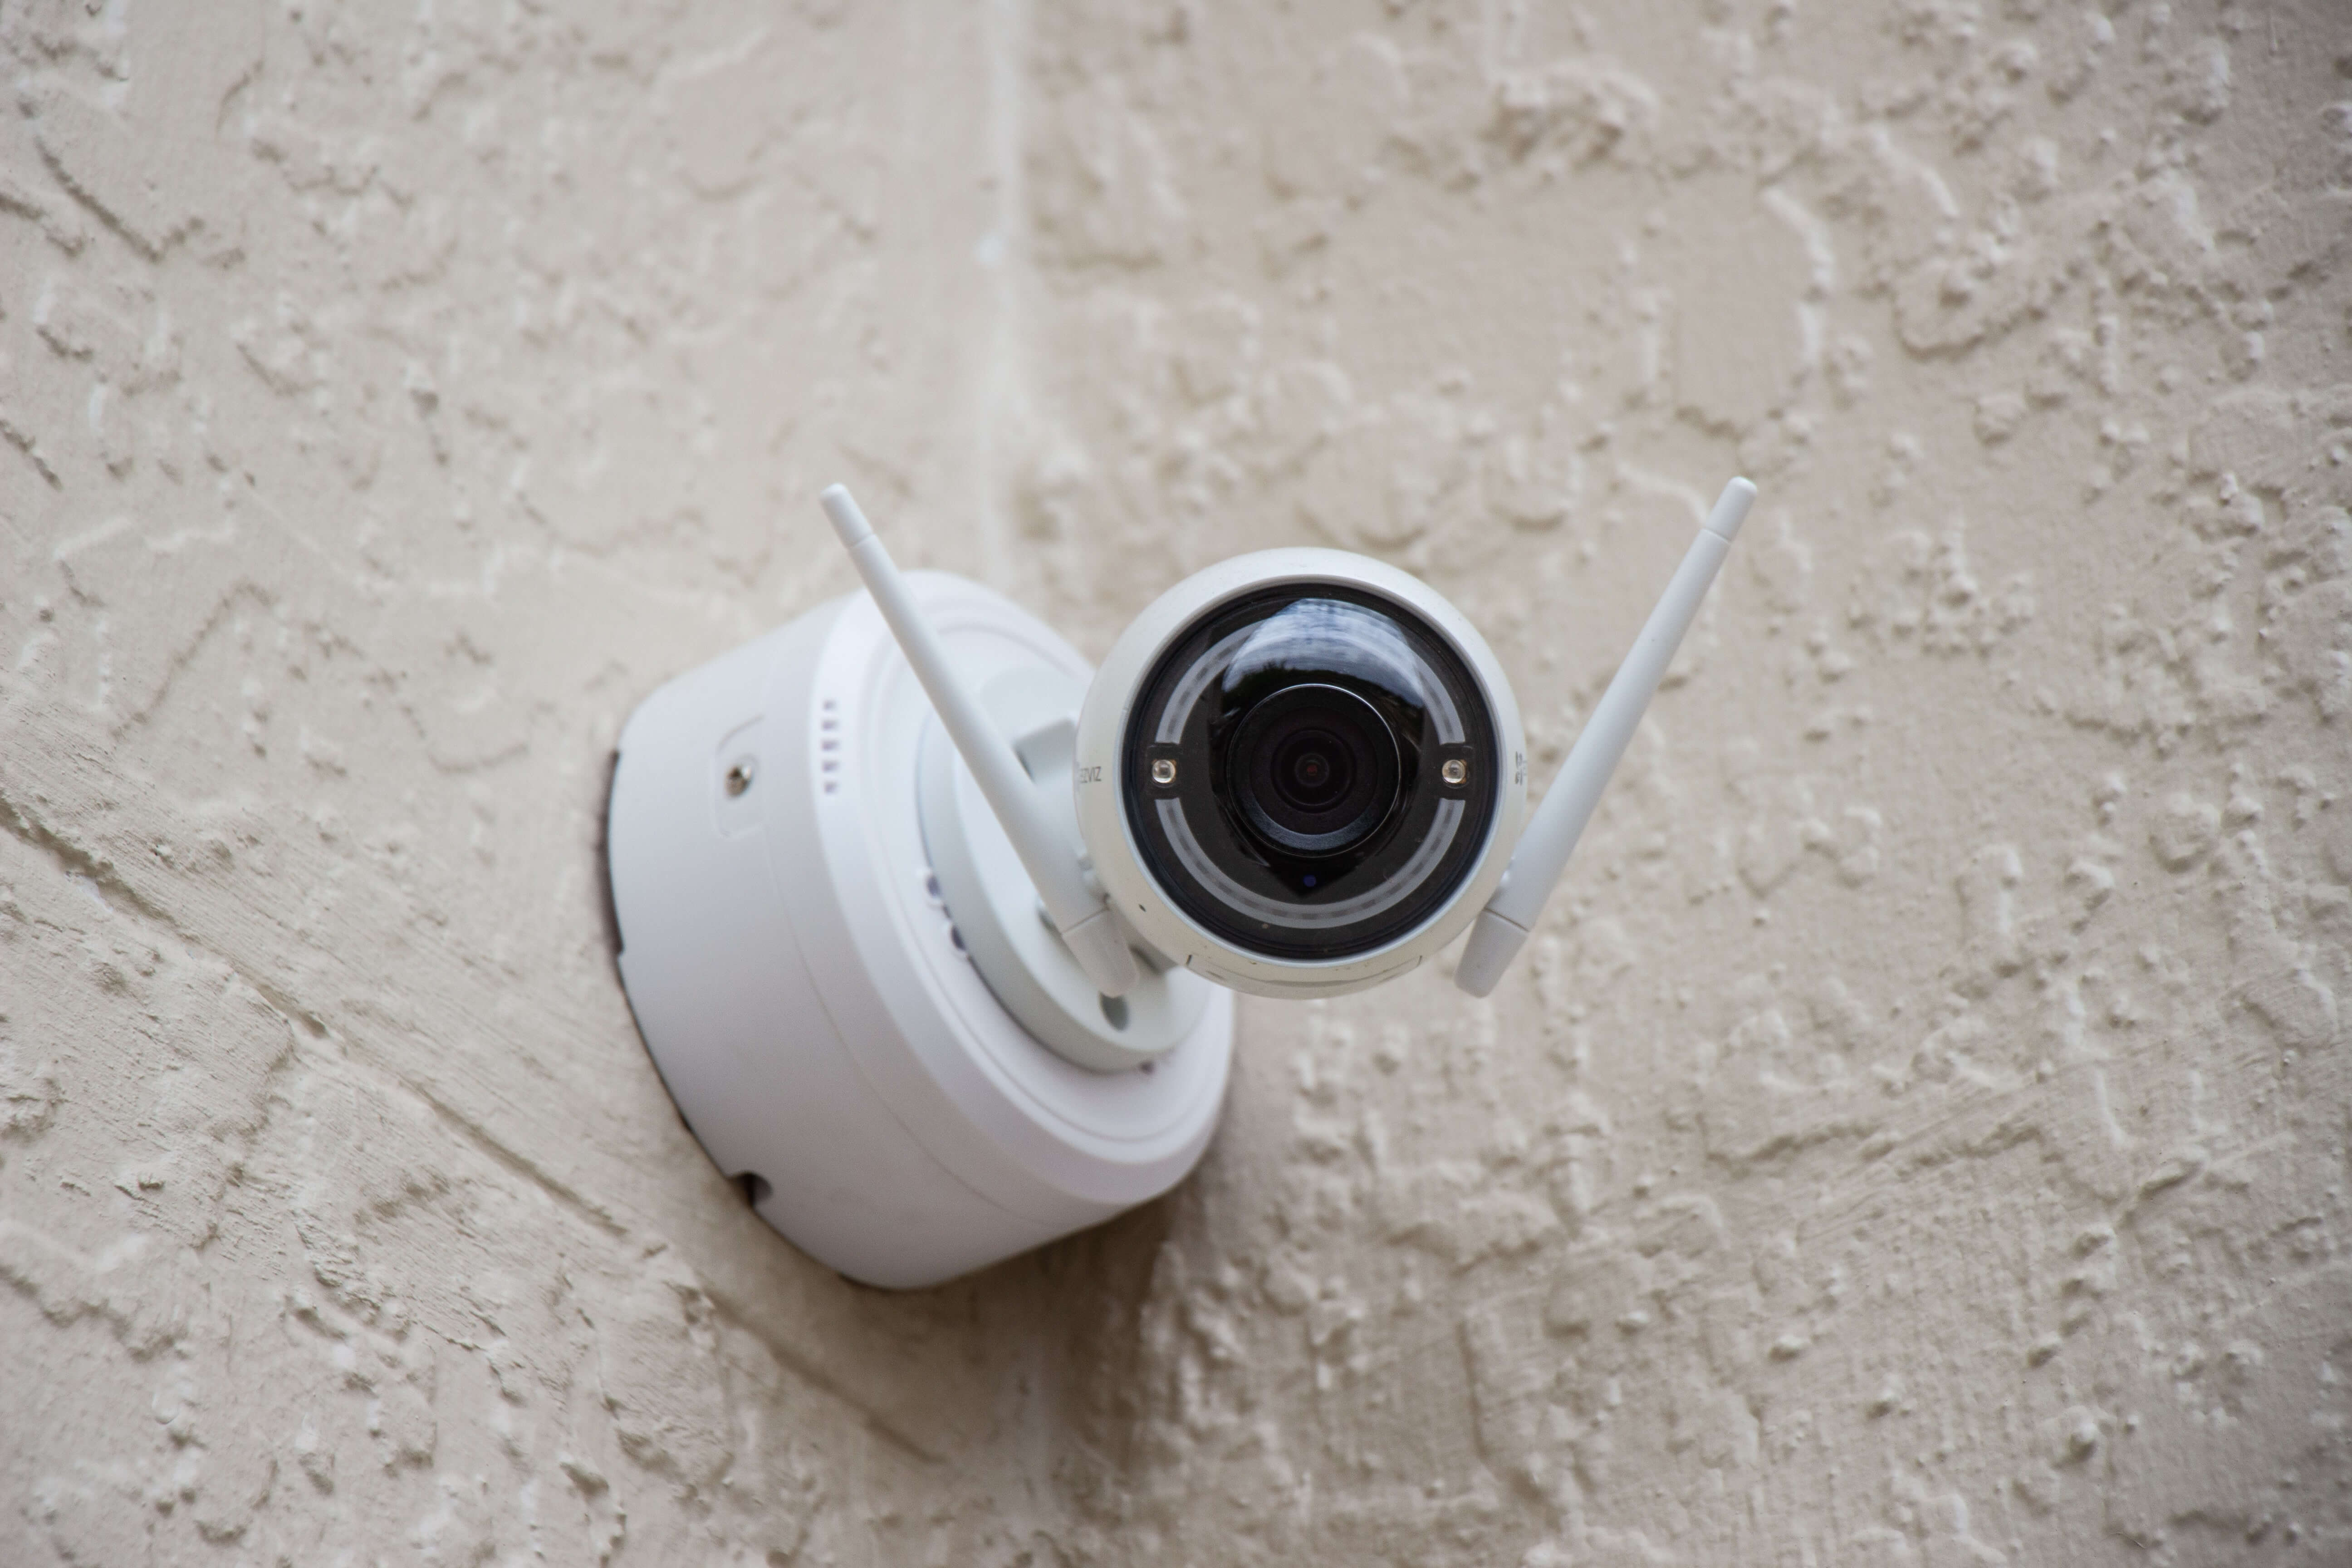 A security camera mounted on an exterior wall